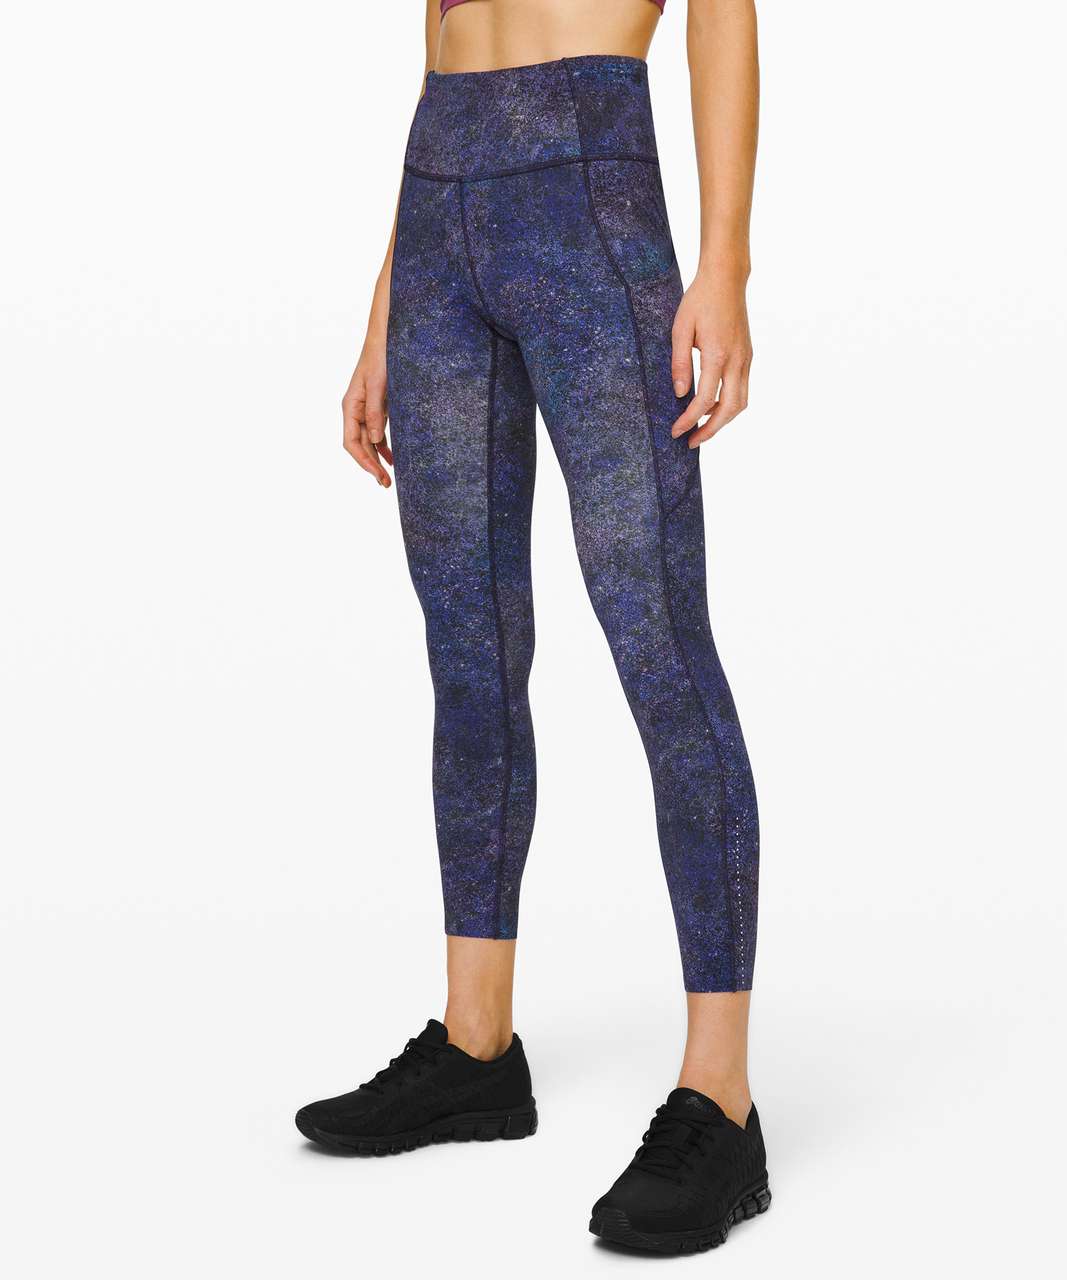 Lululemon Fast and Free Tight II 25 *Non-Reflective Nulux in Polar Shift  Ice Size 4 - $54 - From Emily